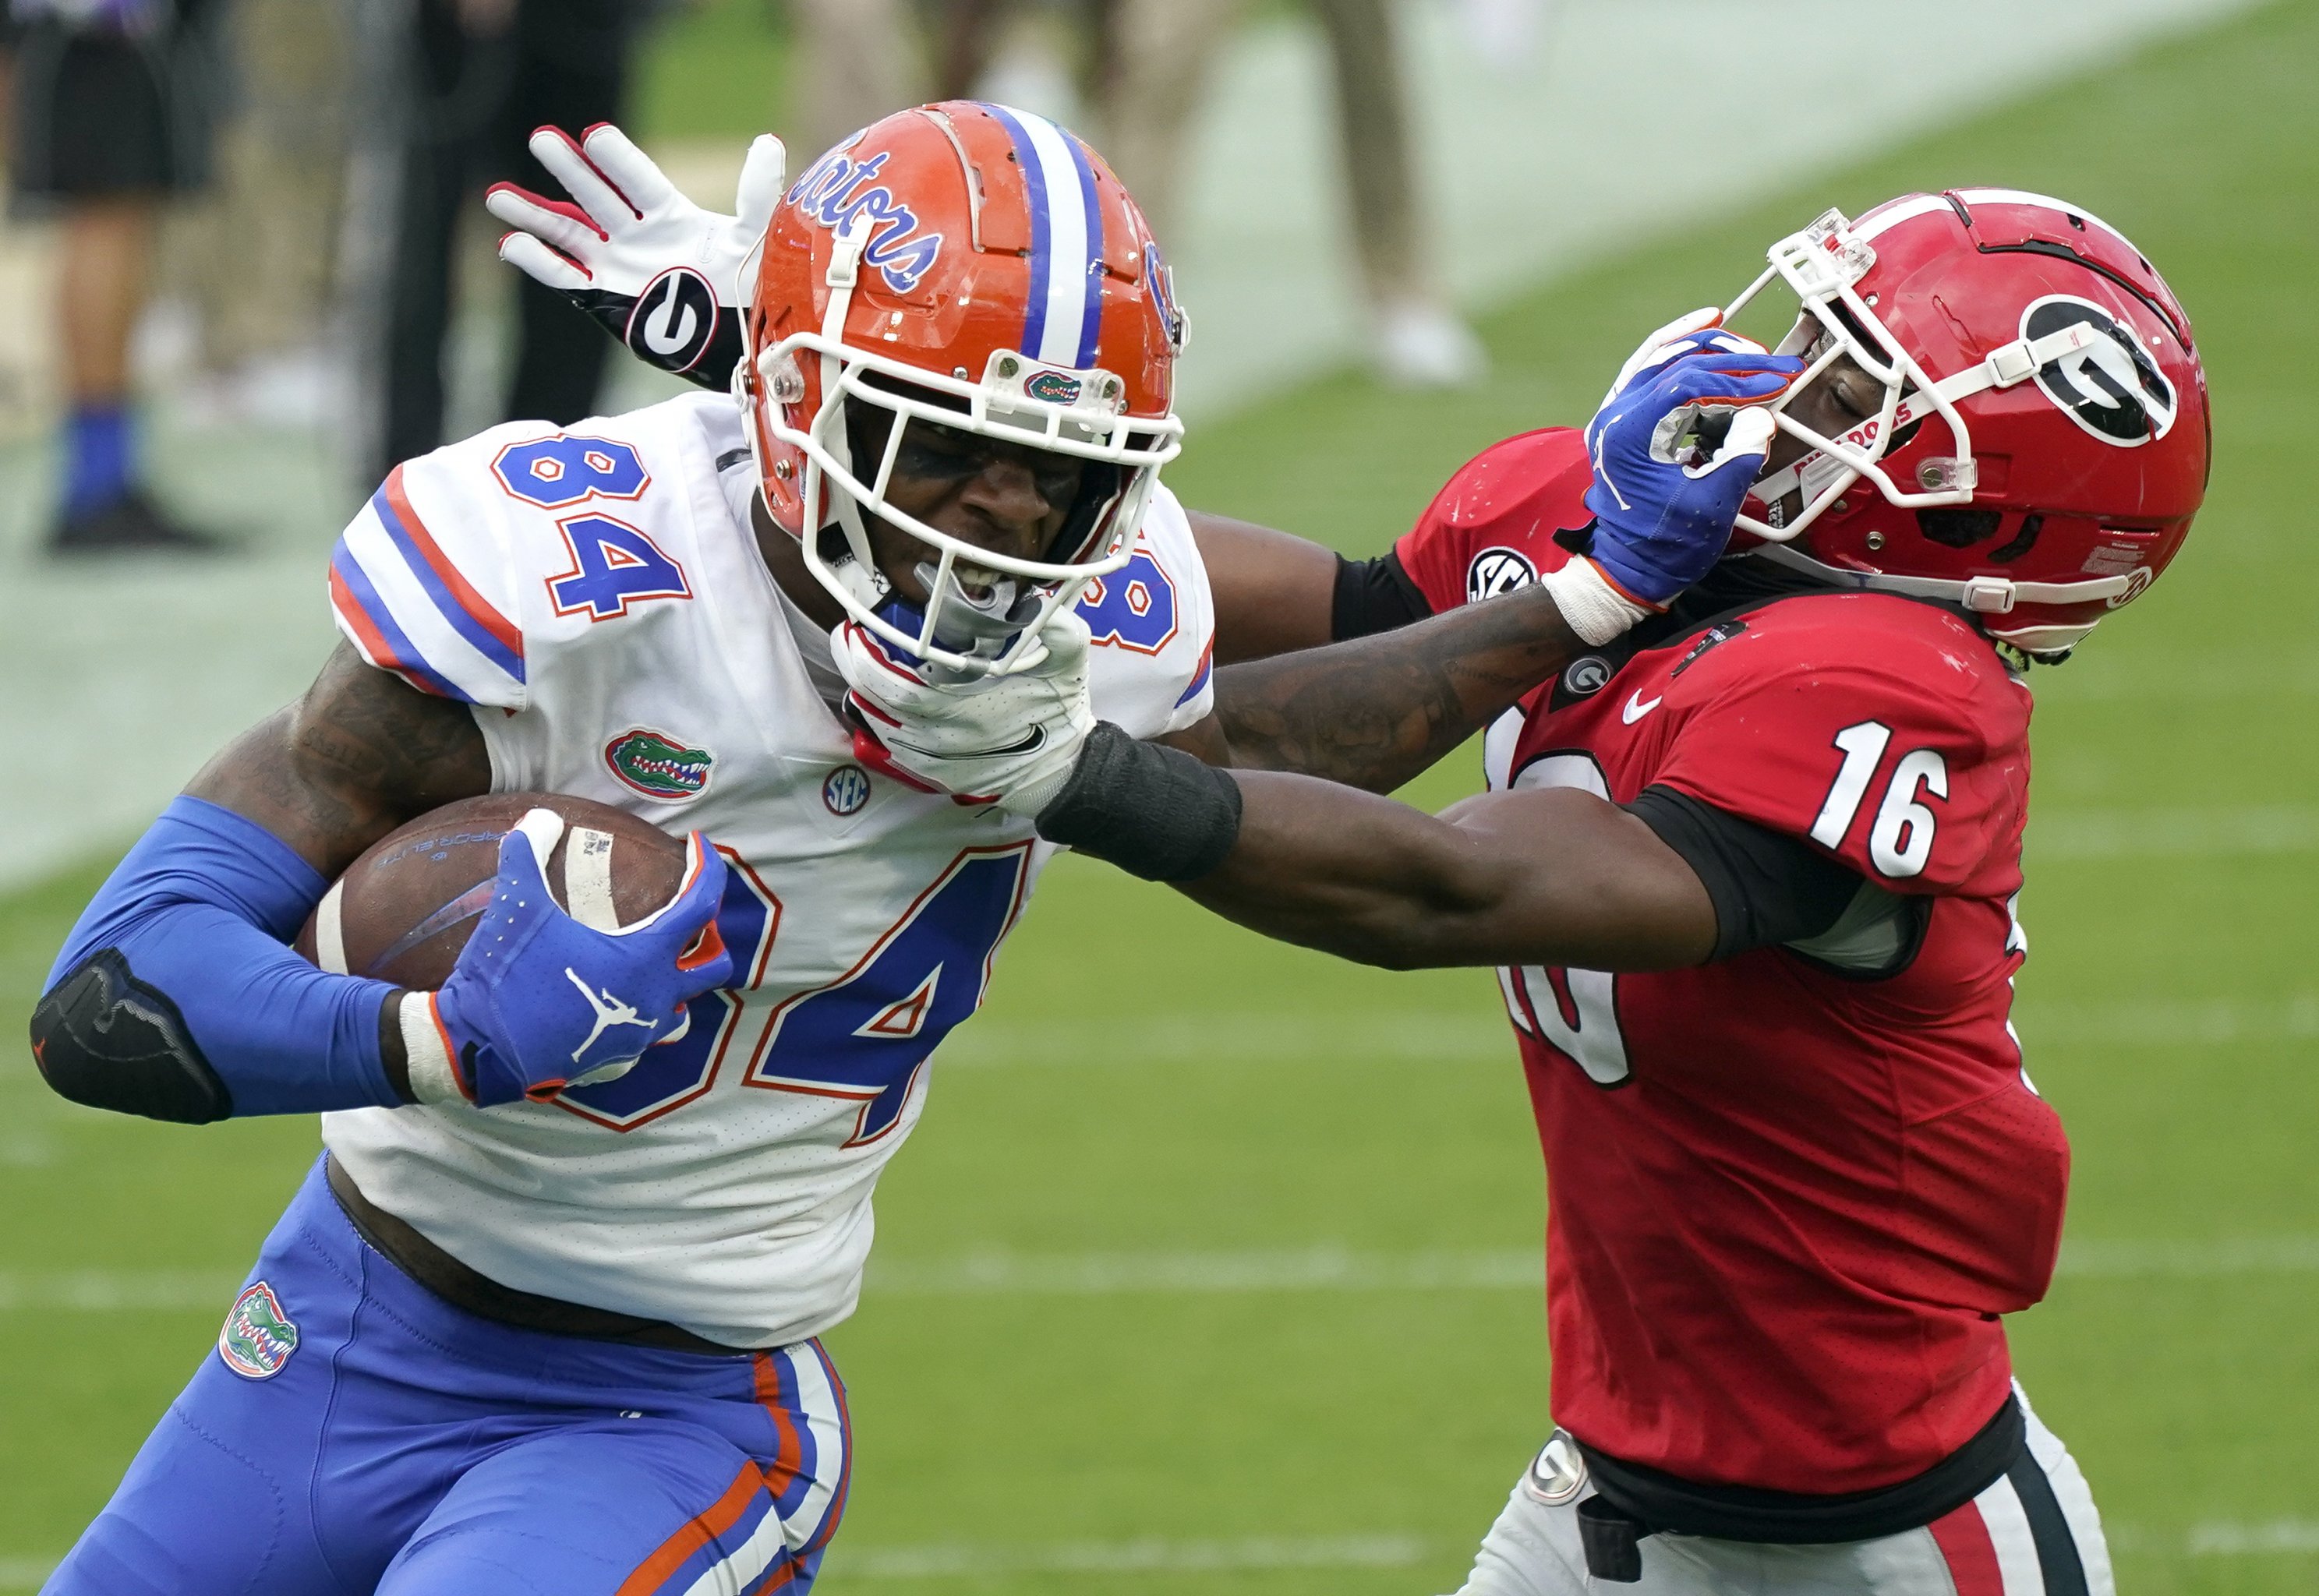 Florida TE Kyle Pitts reveals one player he tries to model his